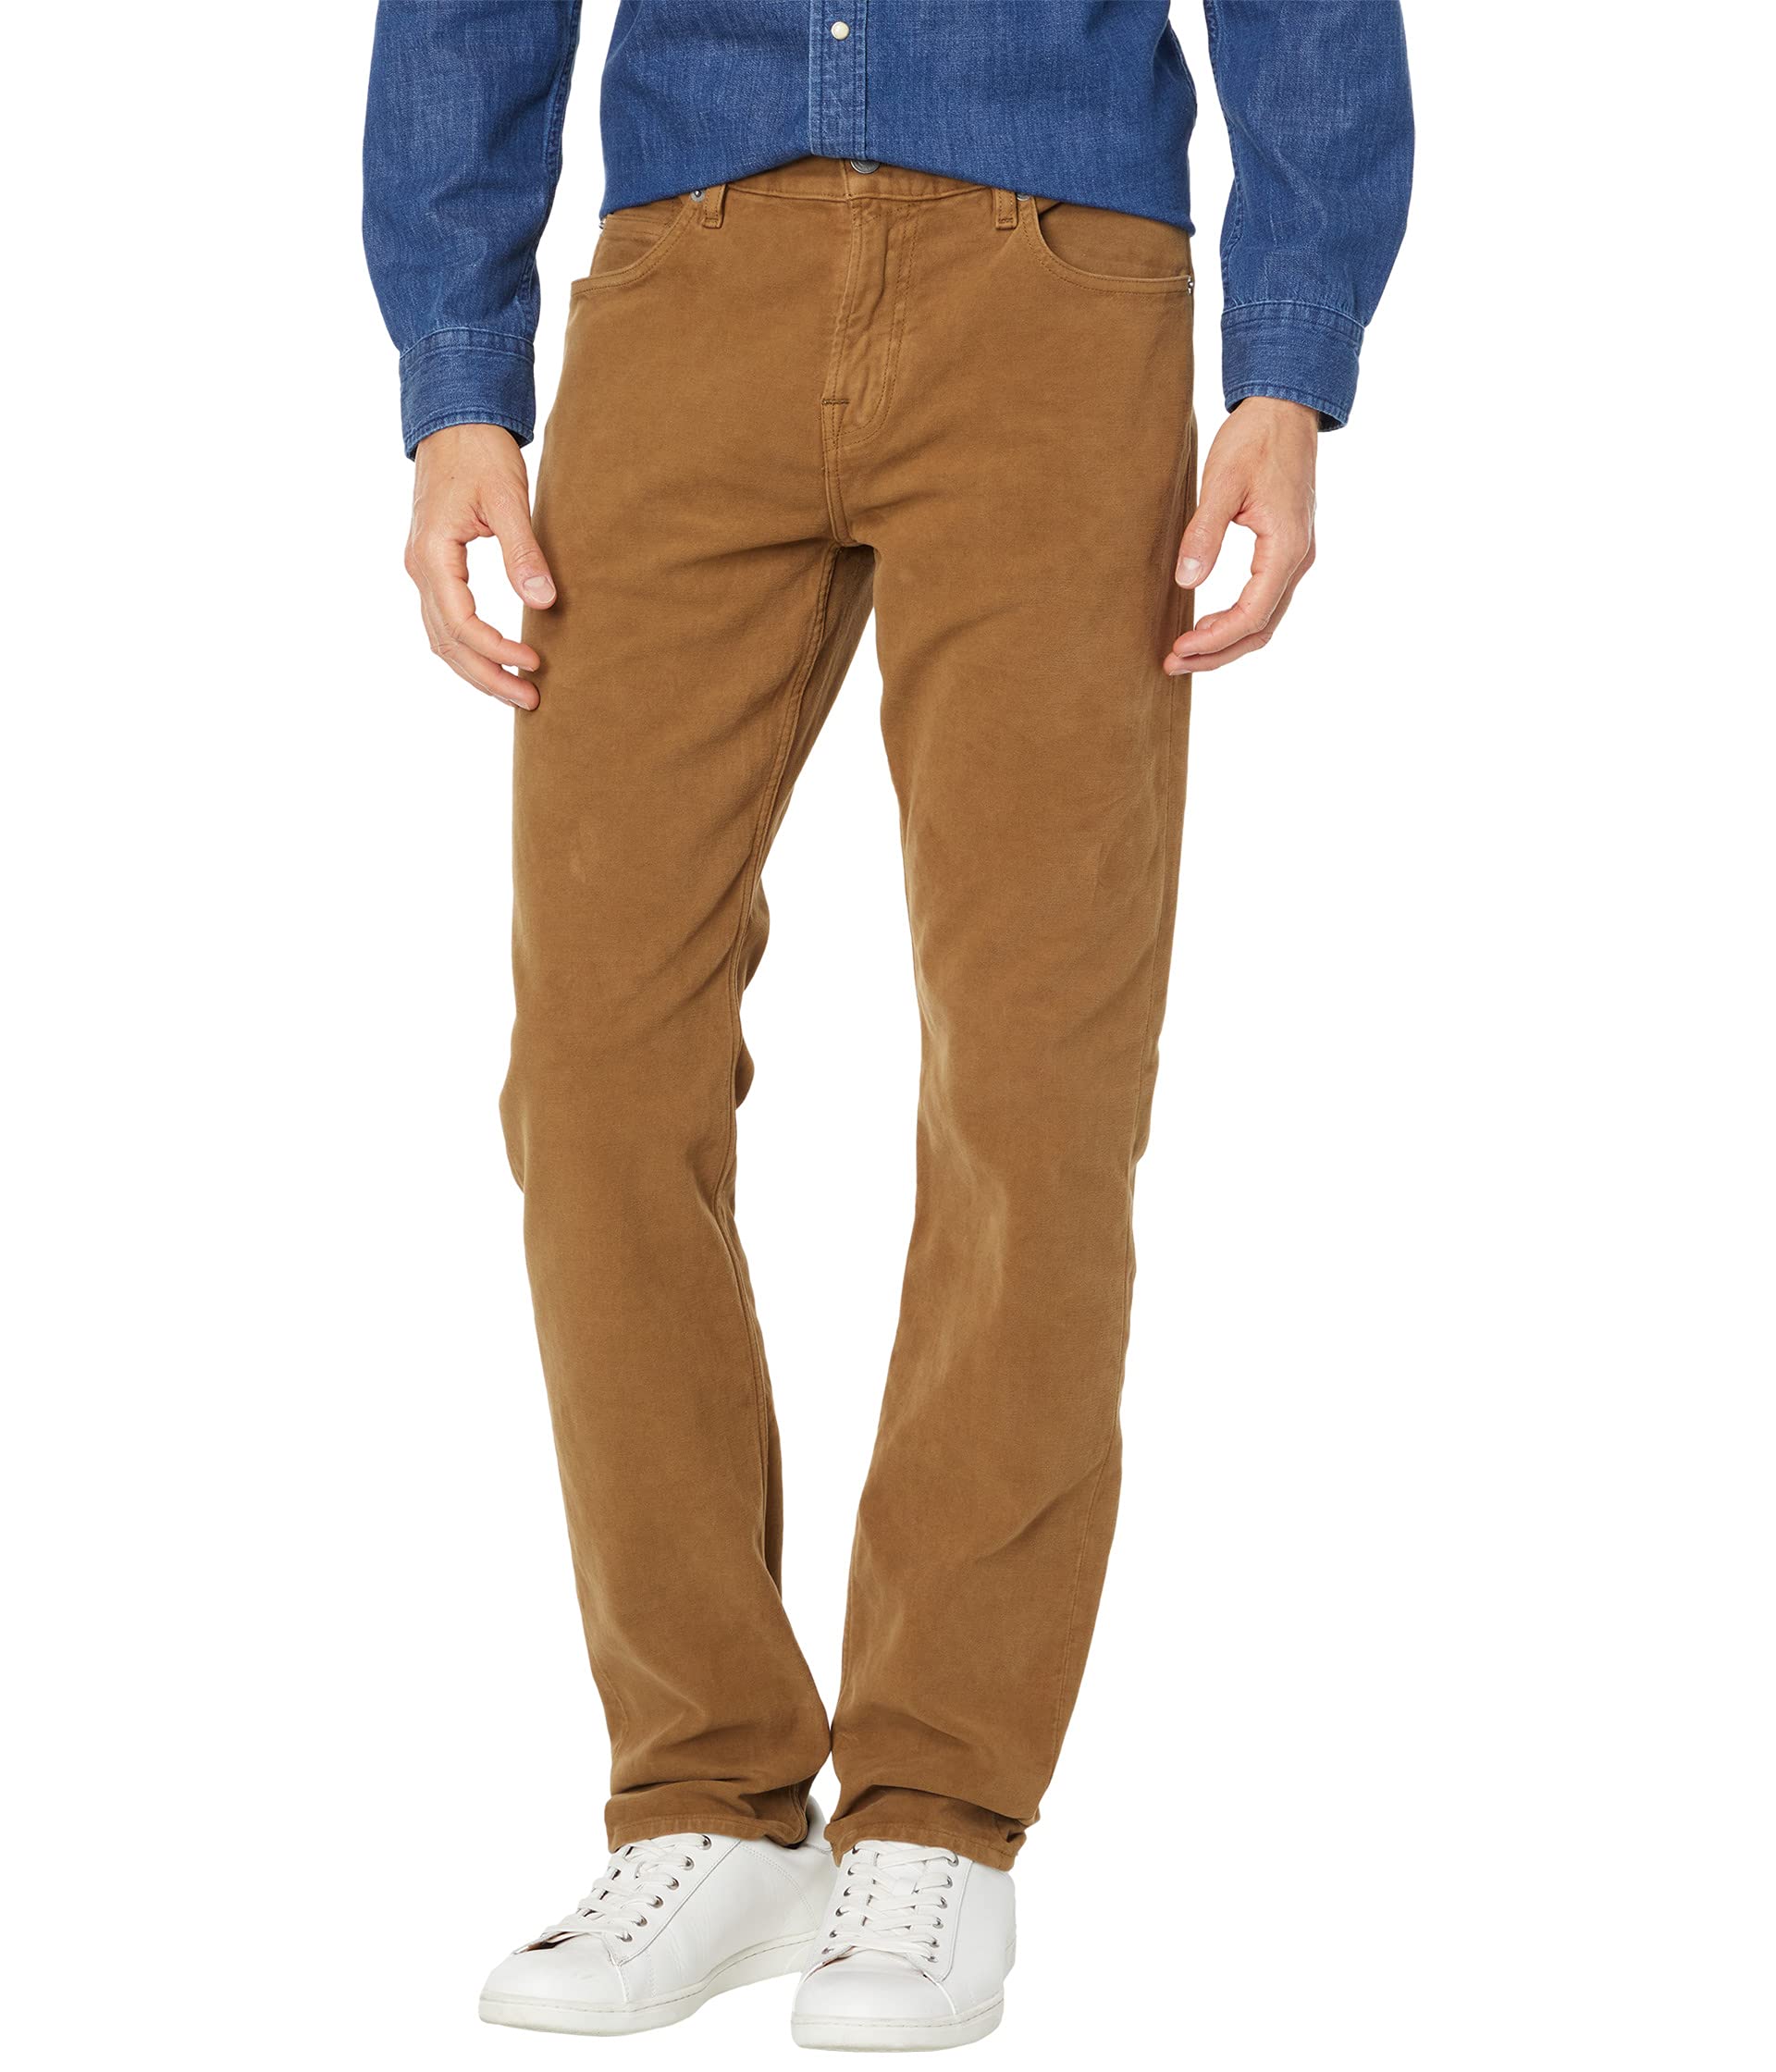 Брюки 7 For All Mankind, Slimmy Pants